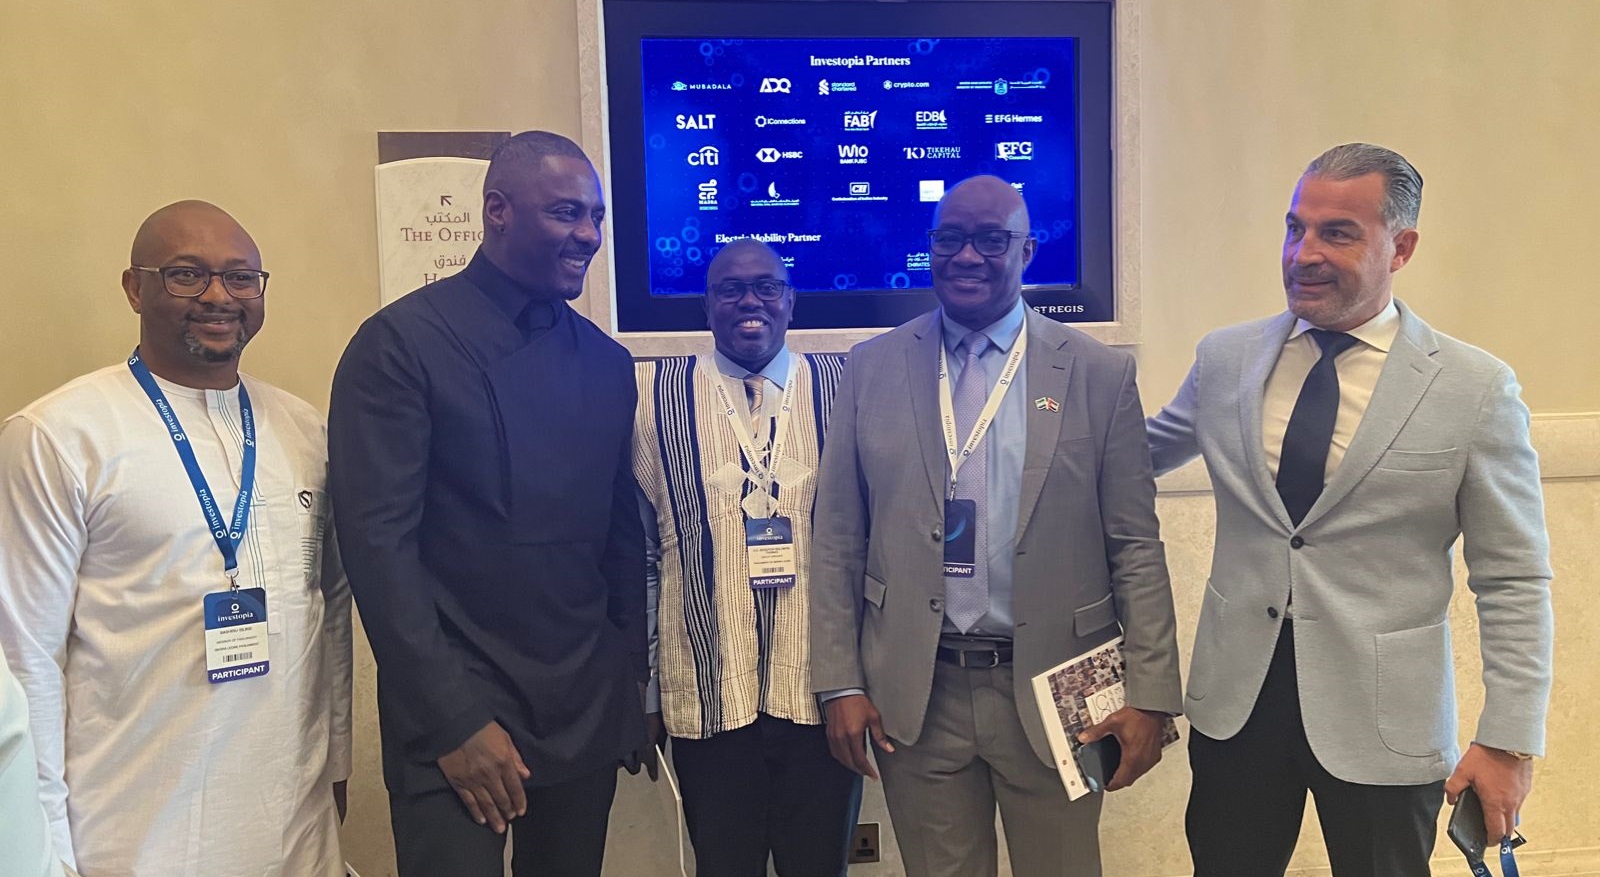 Idris Elba, Other Lawmakers From Sierra Leone Attend Investment Conference in The United Arab Emirates